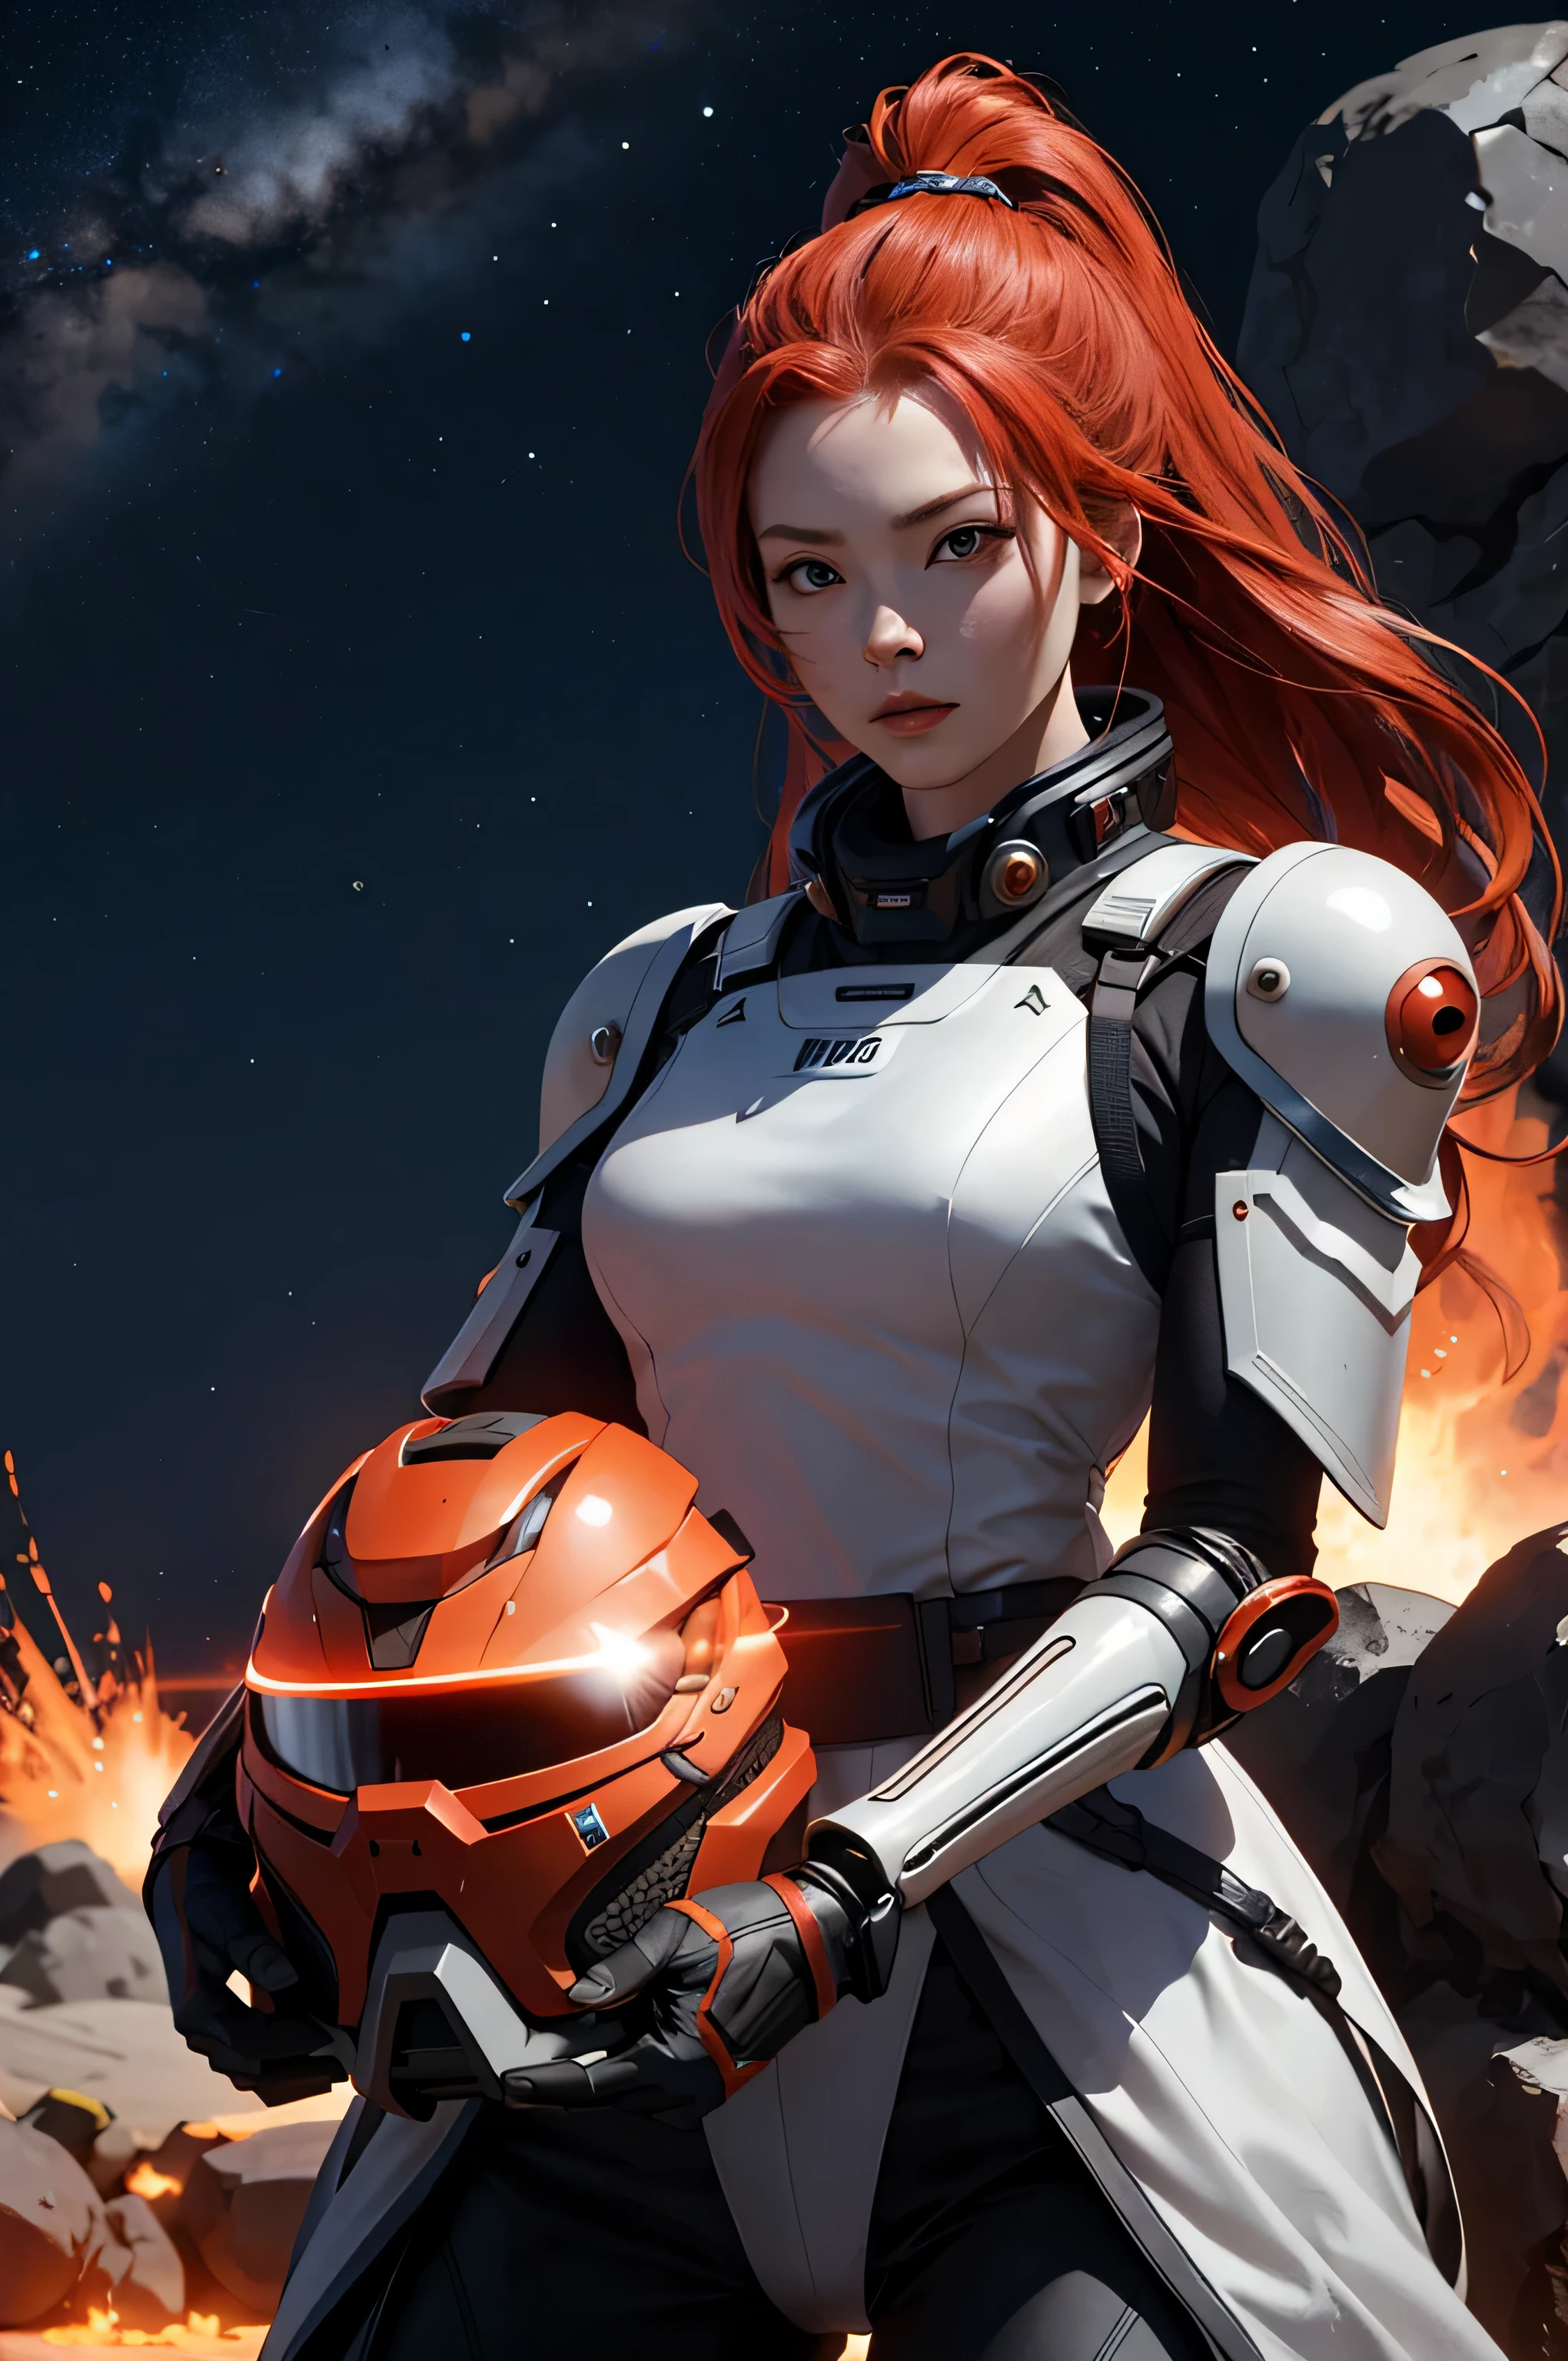 A futuristic redhead 1 girl dressing samurai armor, riding a space motorcycle across a desert in a lava planet with 2 stars. 4K, Accurate, Cinematic, Photorealistic, High detail, Futurism, Cinematic Lighting, Best Quality